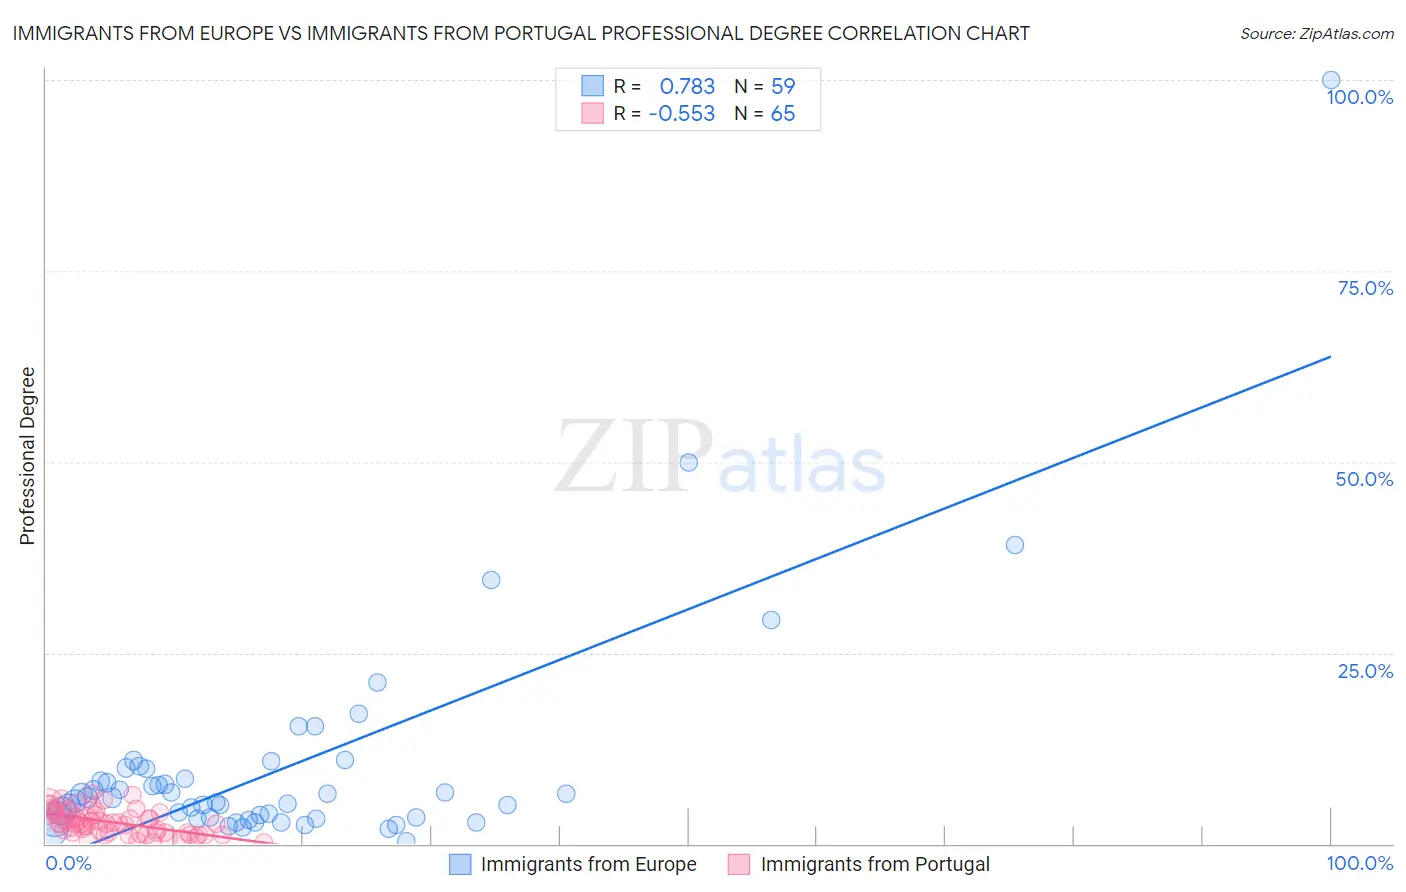 Immigrants from Europe vs Immigrants from Portugal Professional Degree